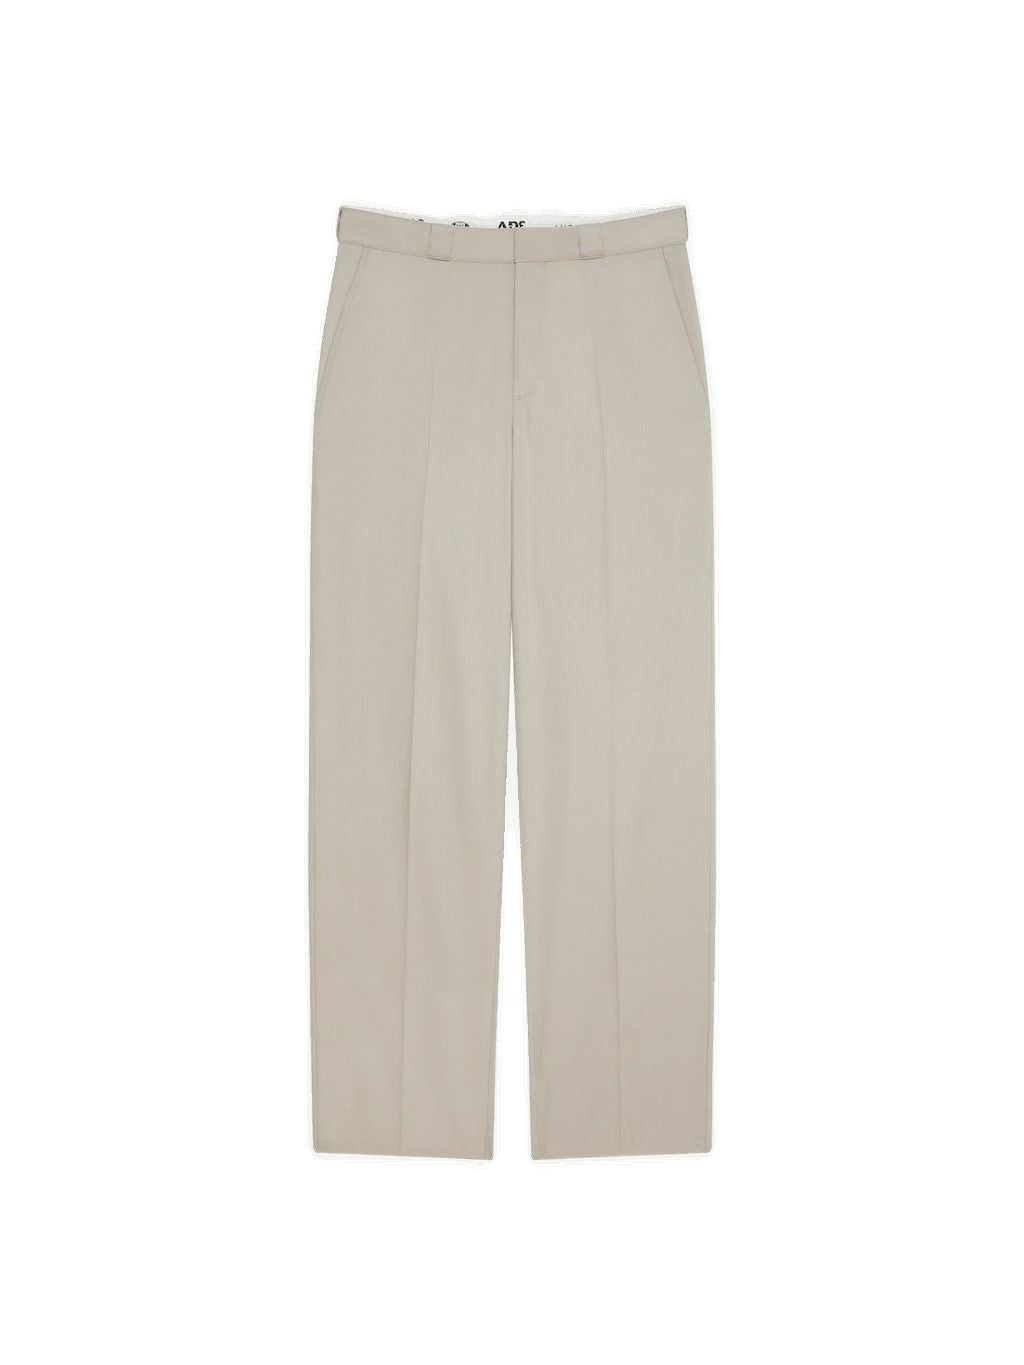 GIVENCHY Casual Unstitched Pant in Stone Grey for Men